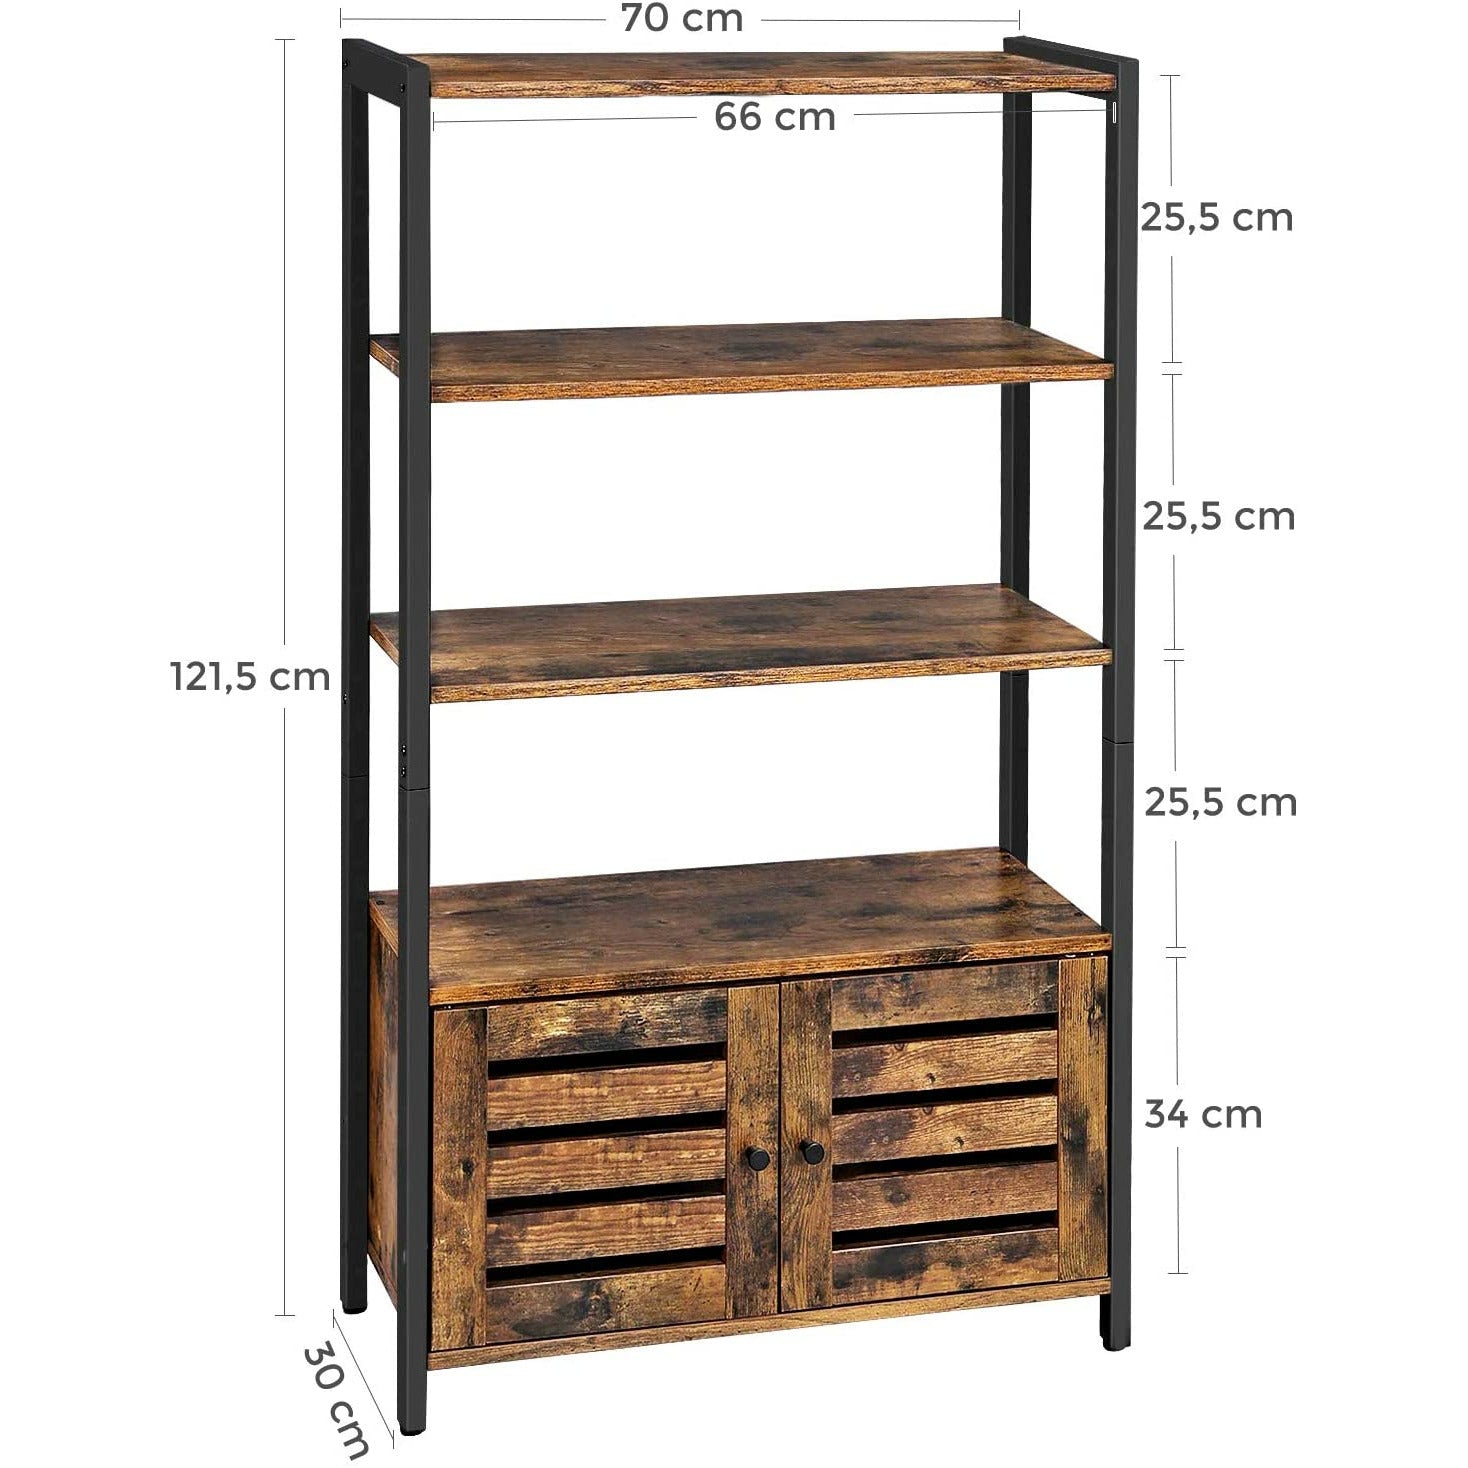 Floor-Standing Storage Cabinet and Cupboard with 2 Louvred Doors and 3 Shelves, Rustic Brown